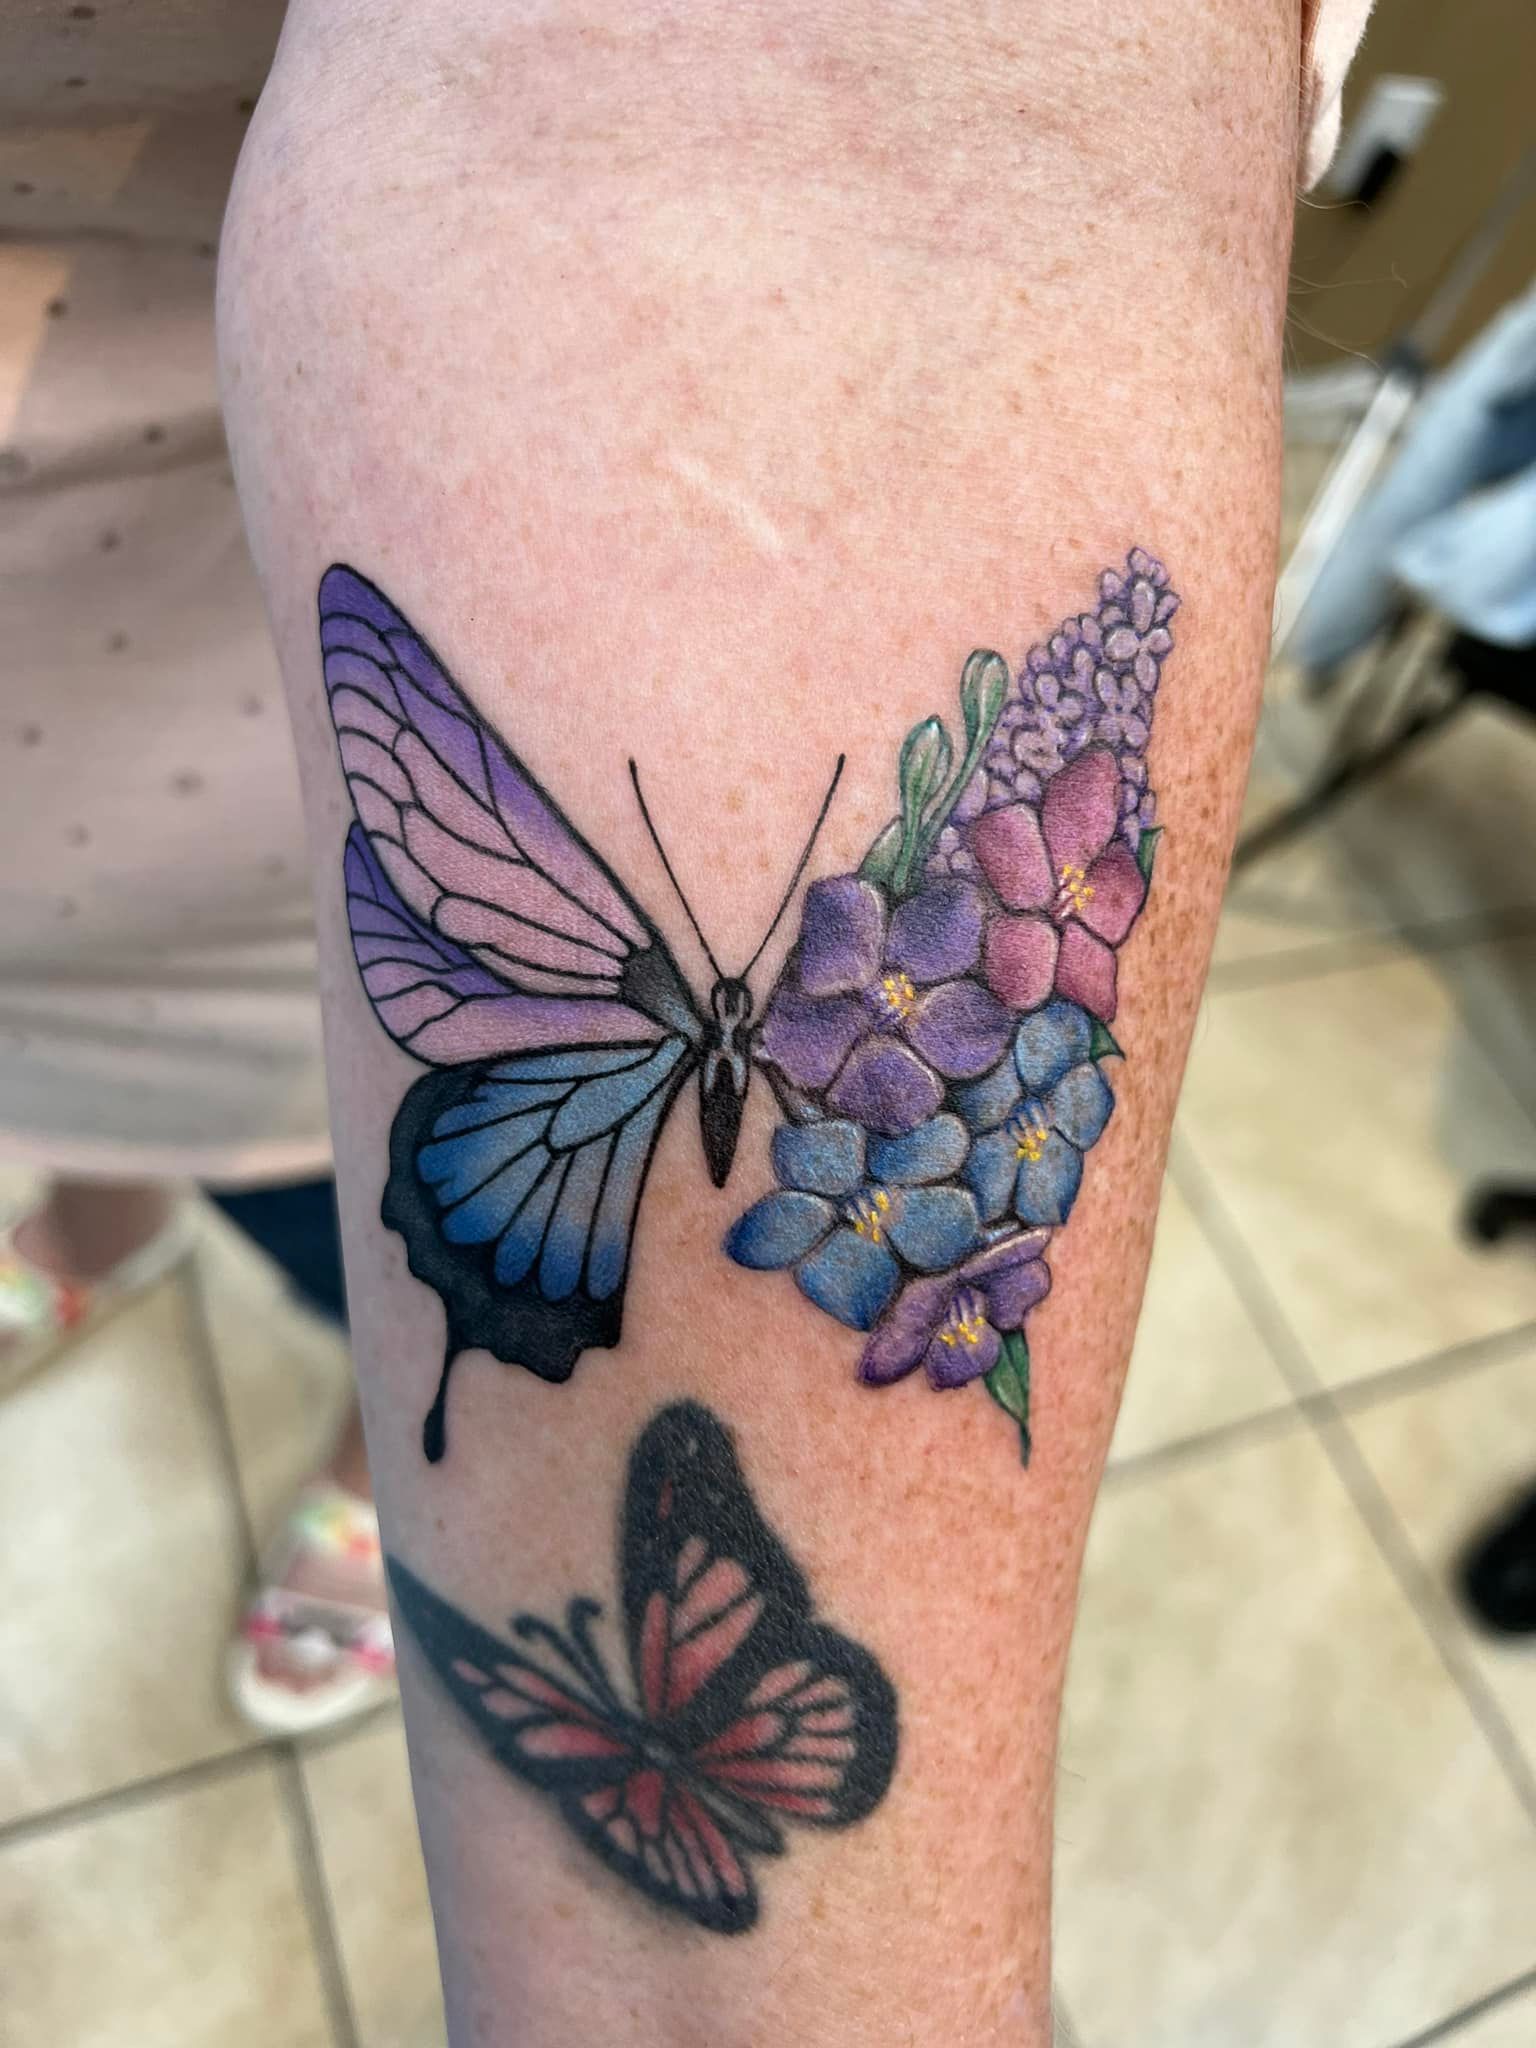 Colorful butterflies tattoo on forearm